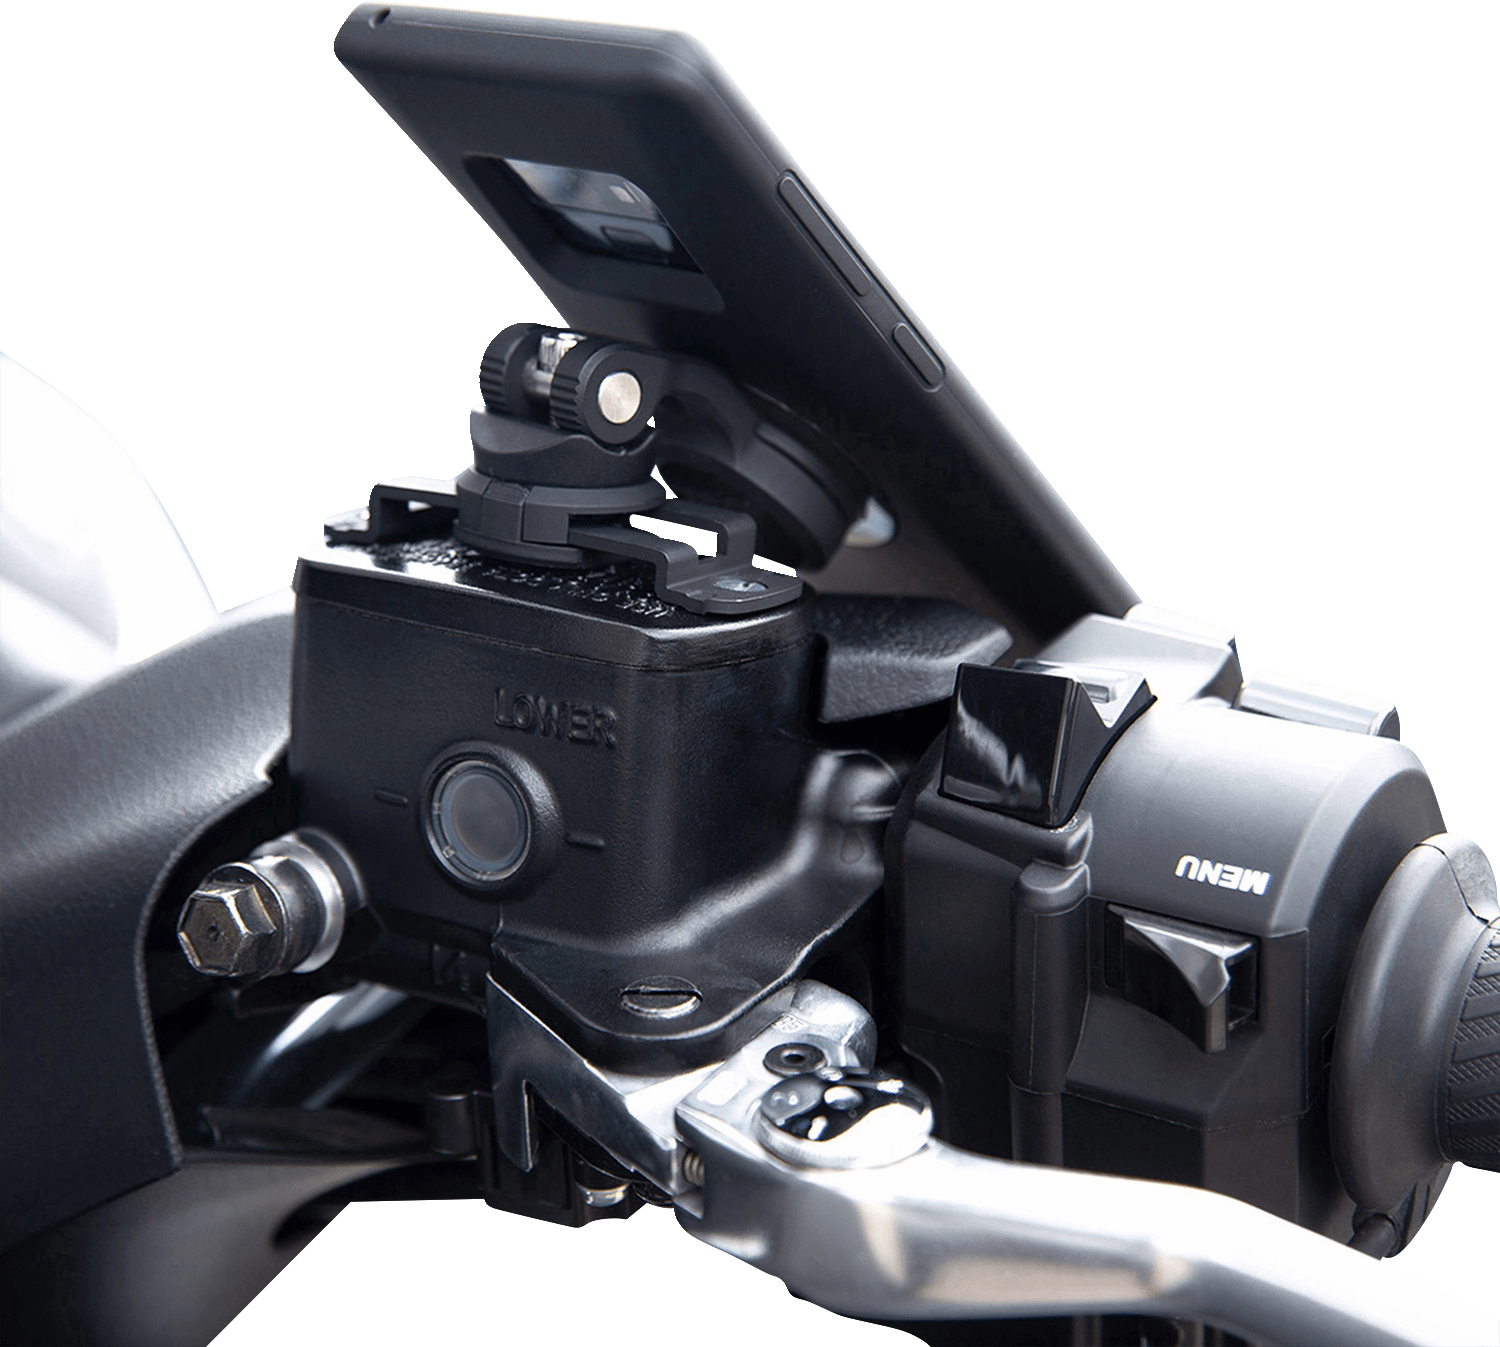 SP CONNECT-Brake Reservoir Phone Mount for SPC-Phone Mounts-MetalCore Harley Supply